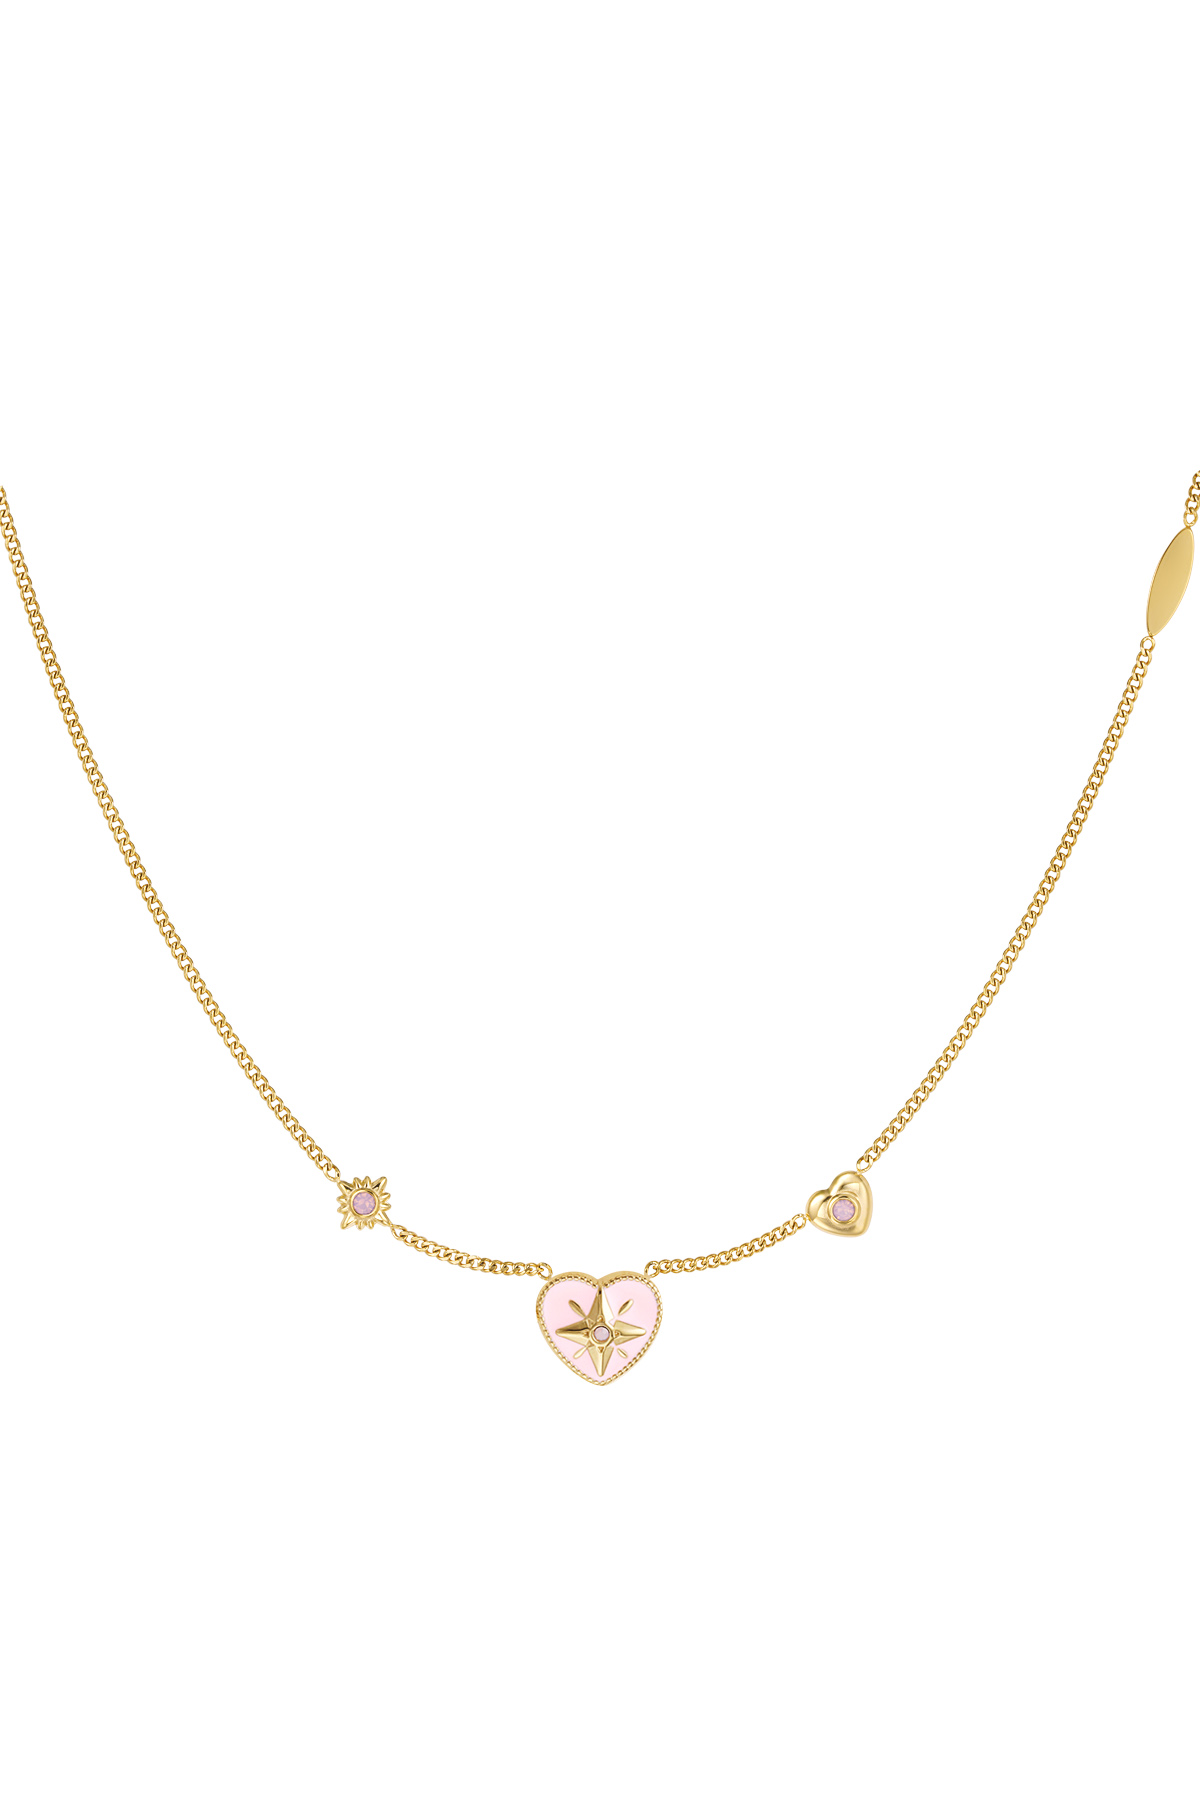 Necklace heart with stones - gold/pink